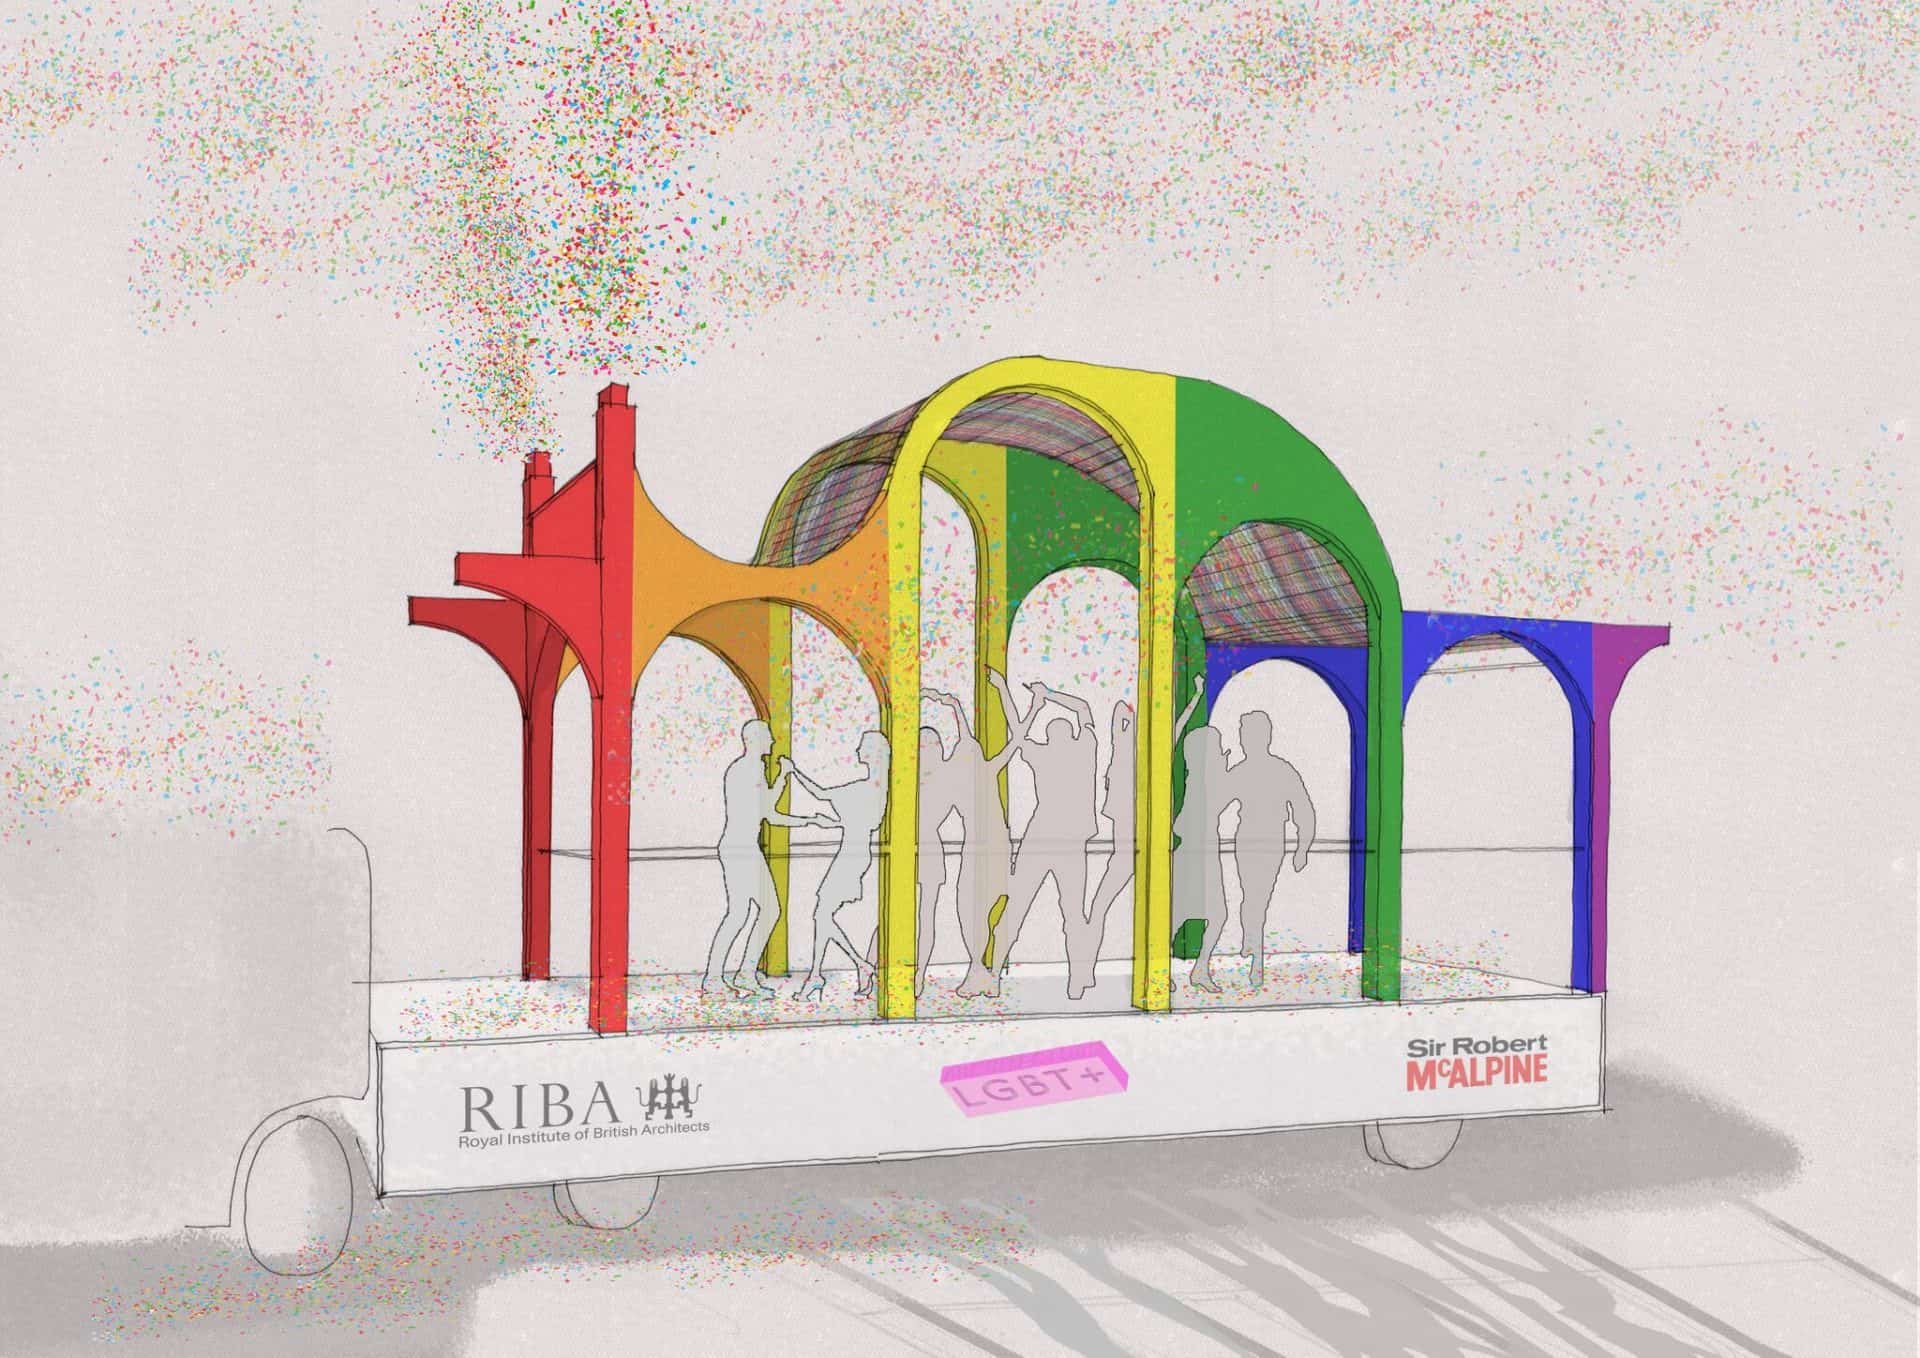 LFA and Architecture LGBT+ announce shortlist for Pride in London float